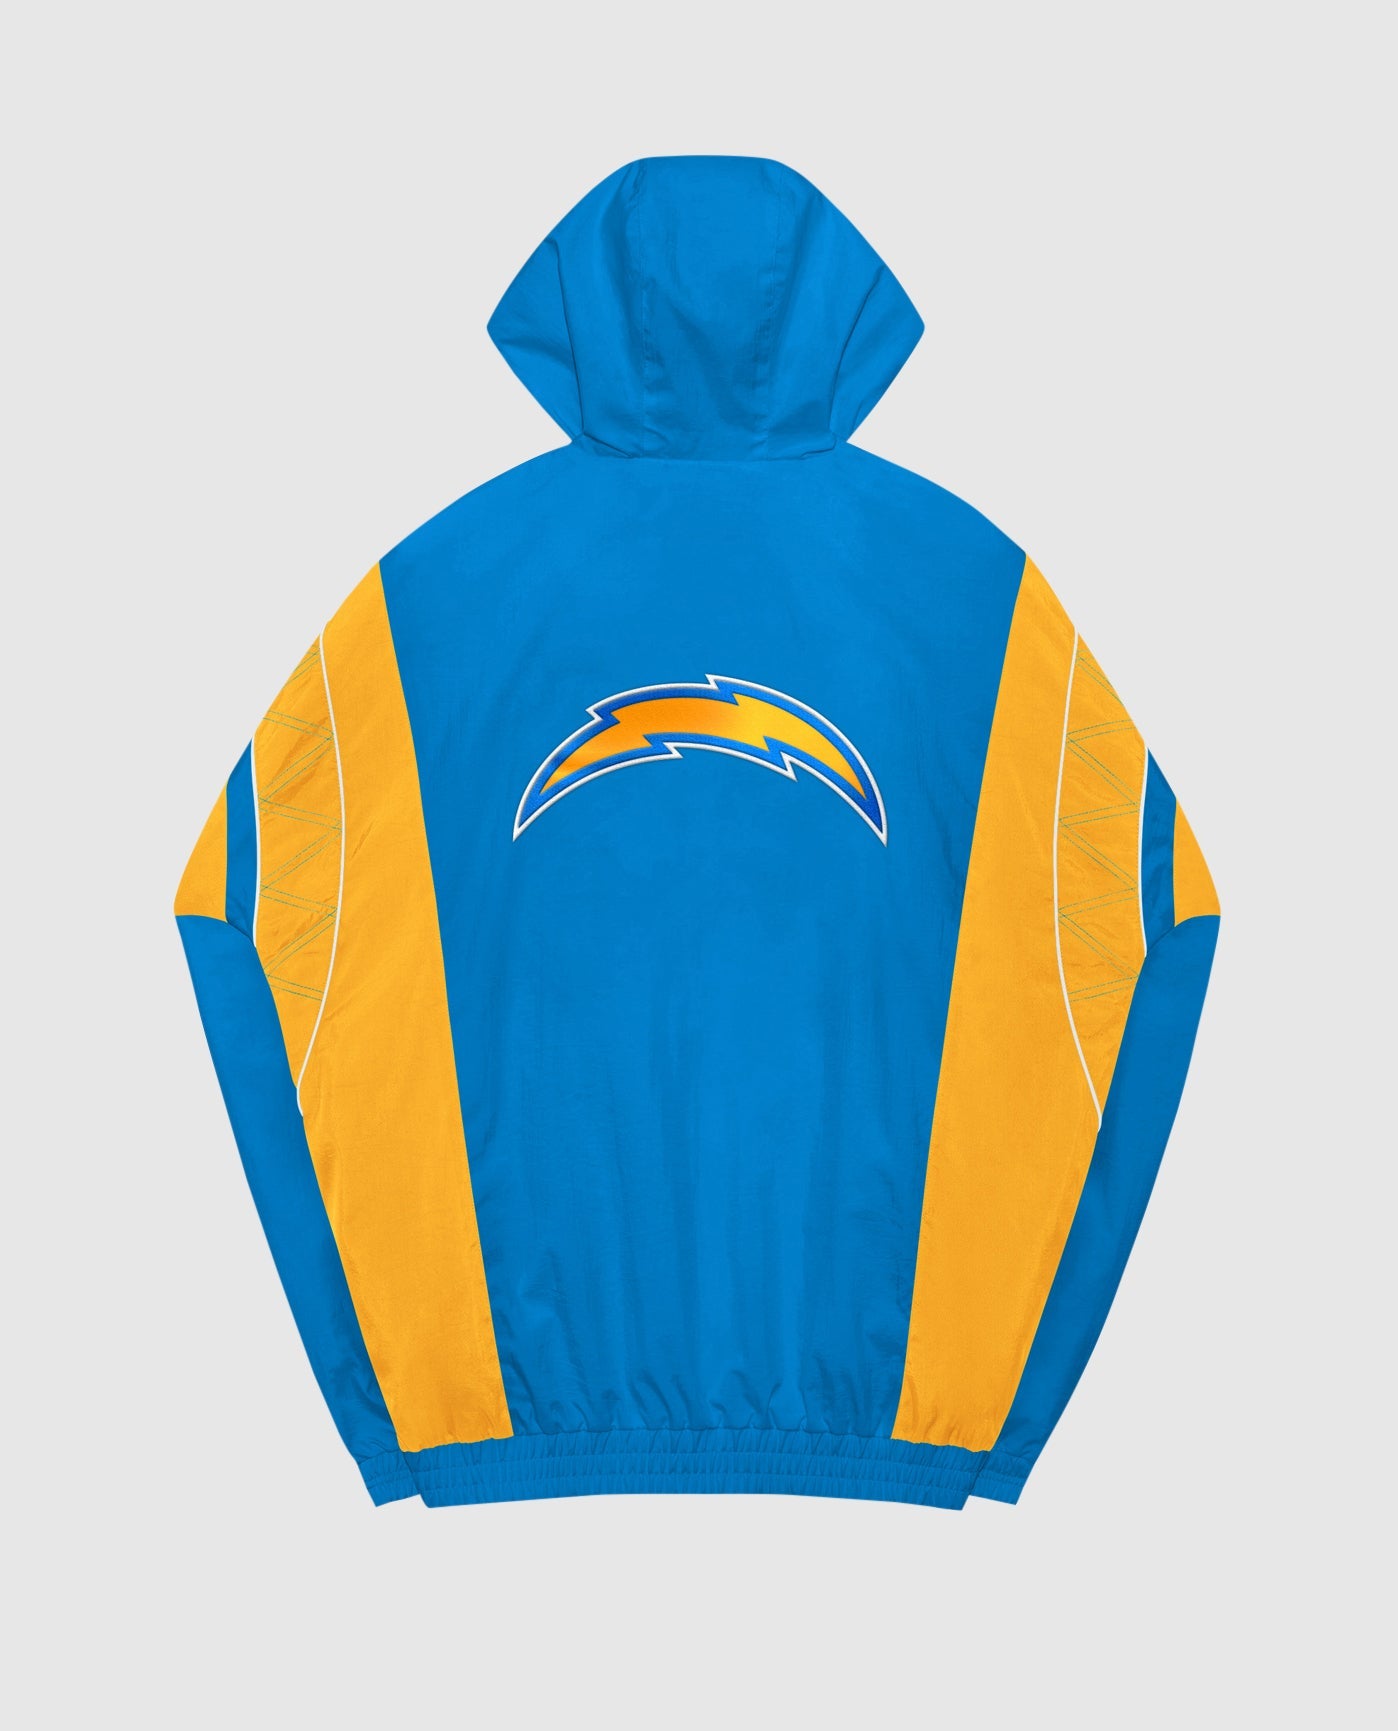 san diego chargers blue